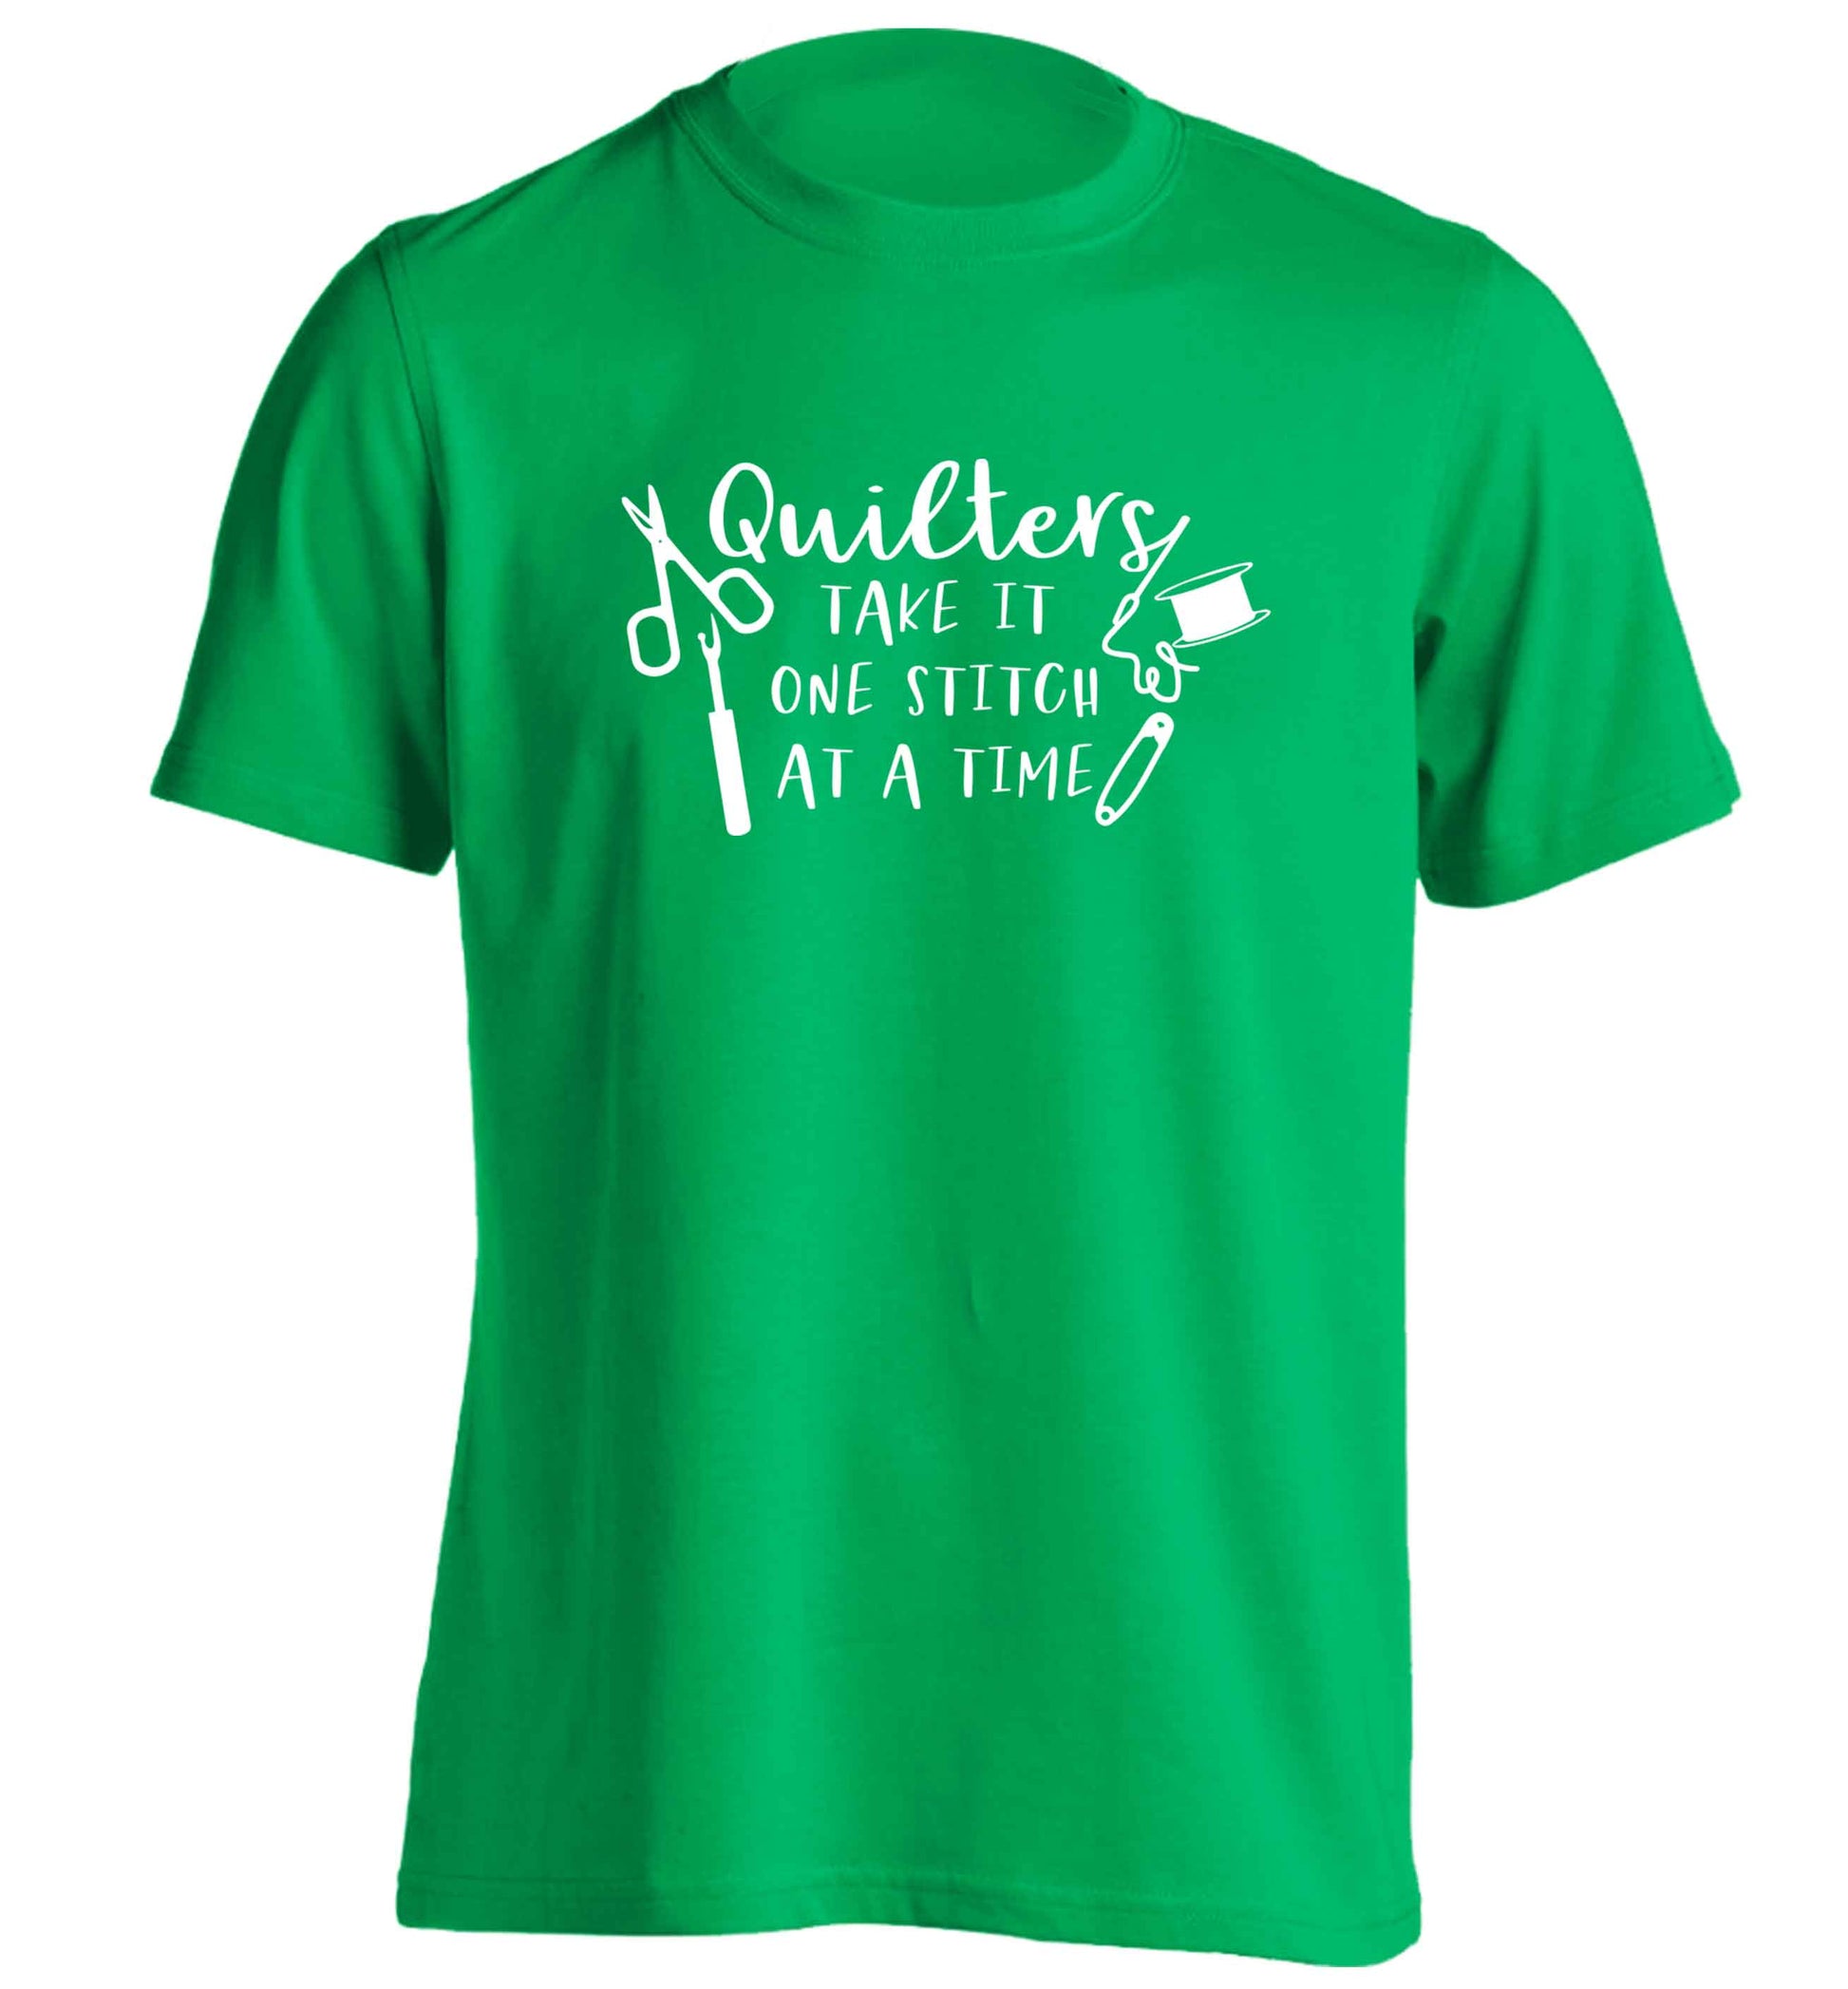 Quilters take it one stitch at a time  adults unisex green Tshirt 2XL